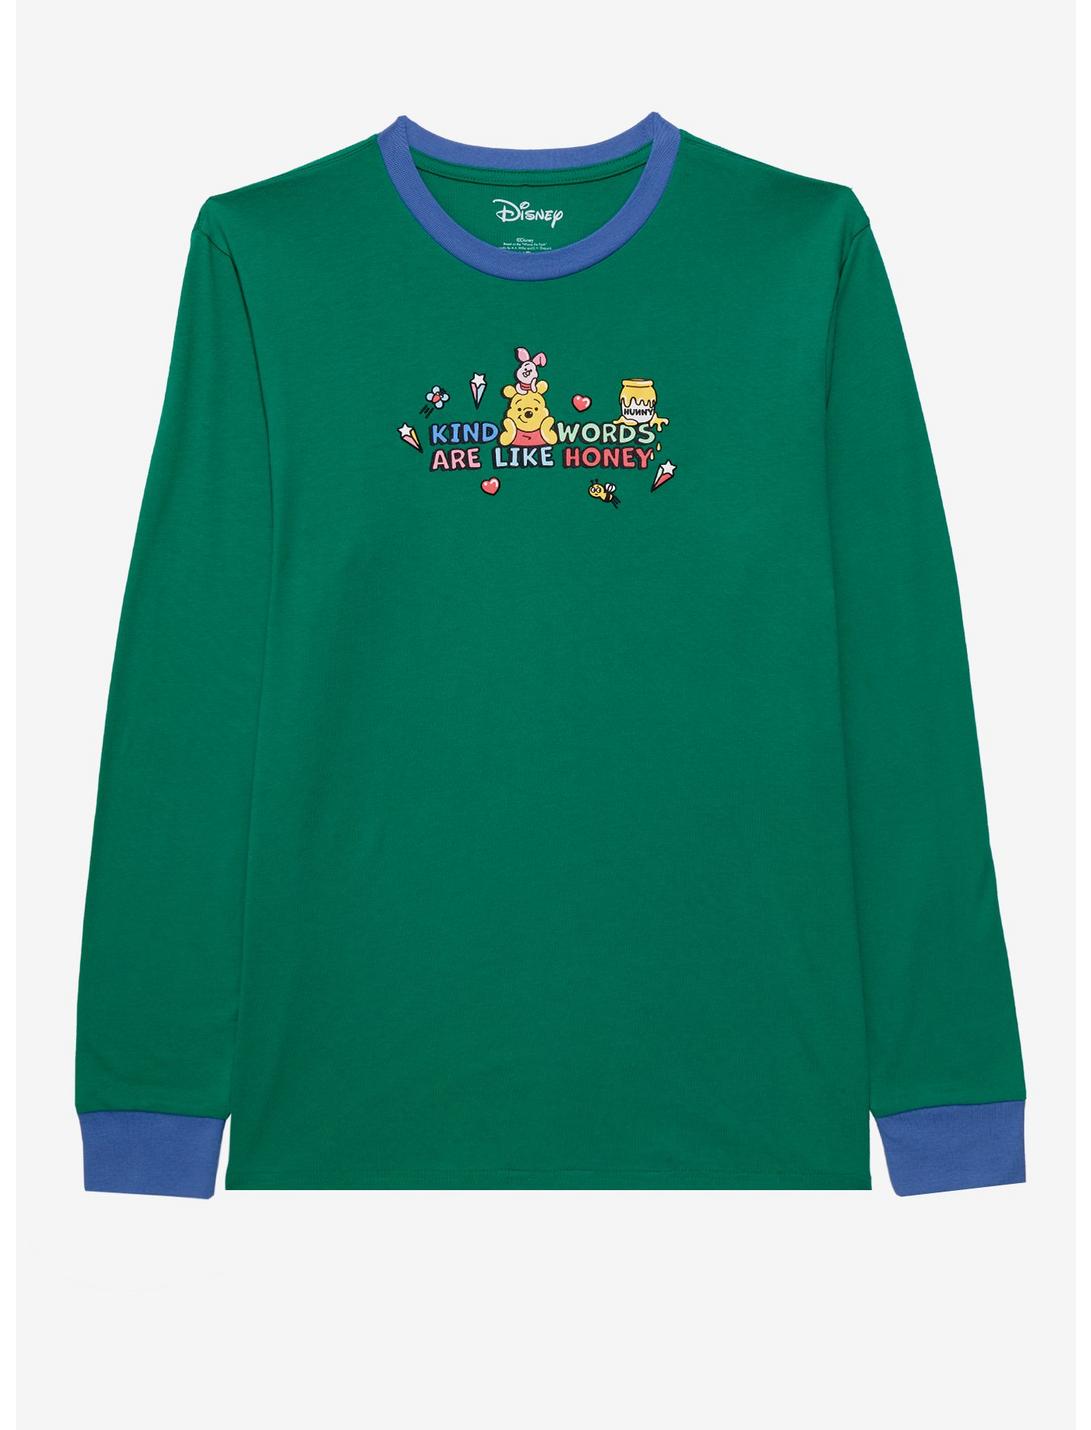 Disney Winnie the Pooh Kind Words Long Sleeve T-Shirt - BoxLunch Exclusive , GREEN, hi-res